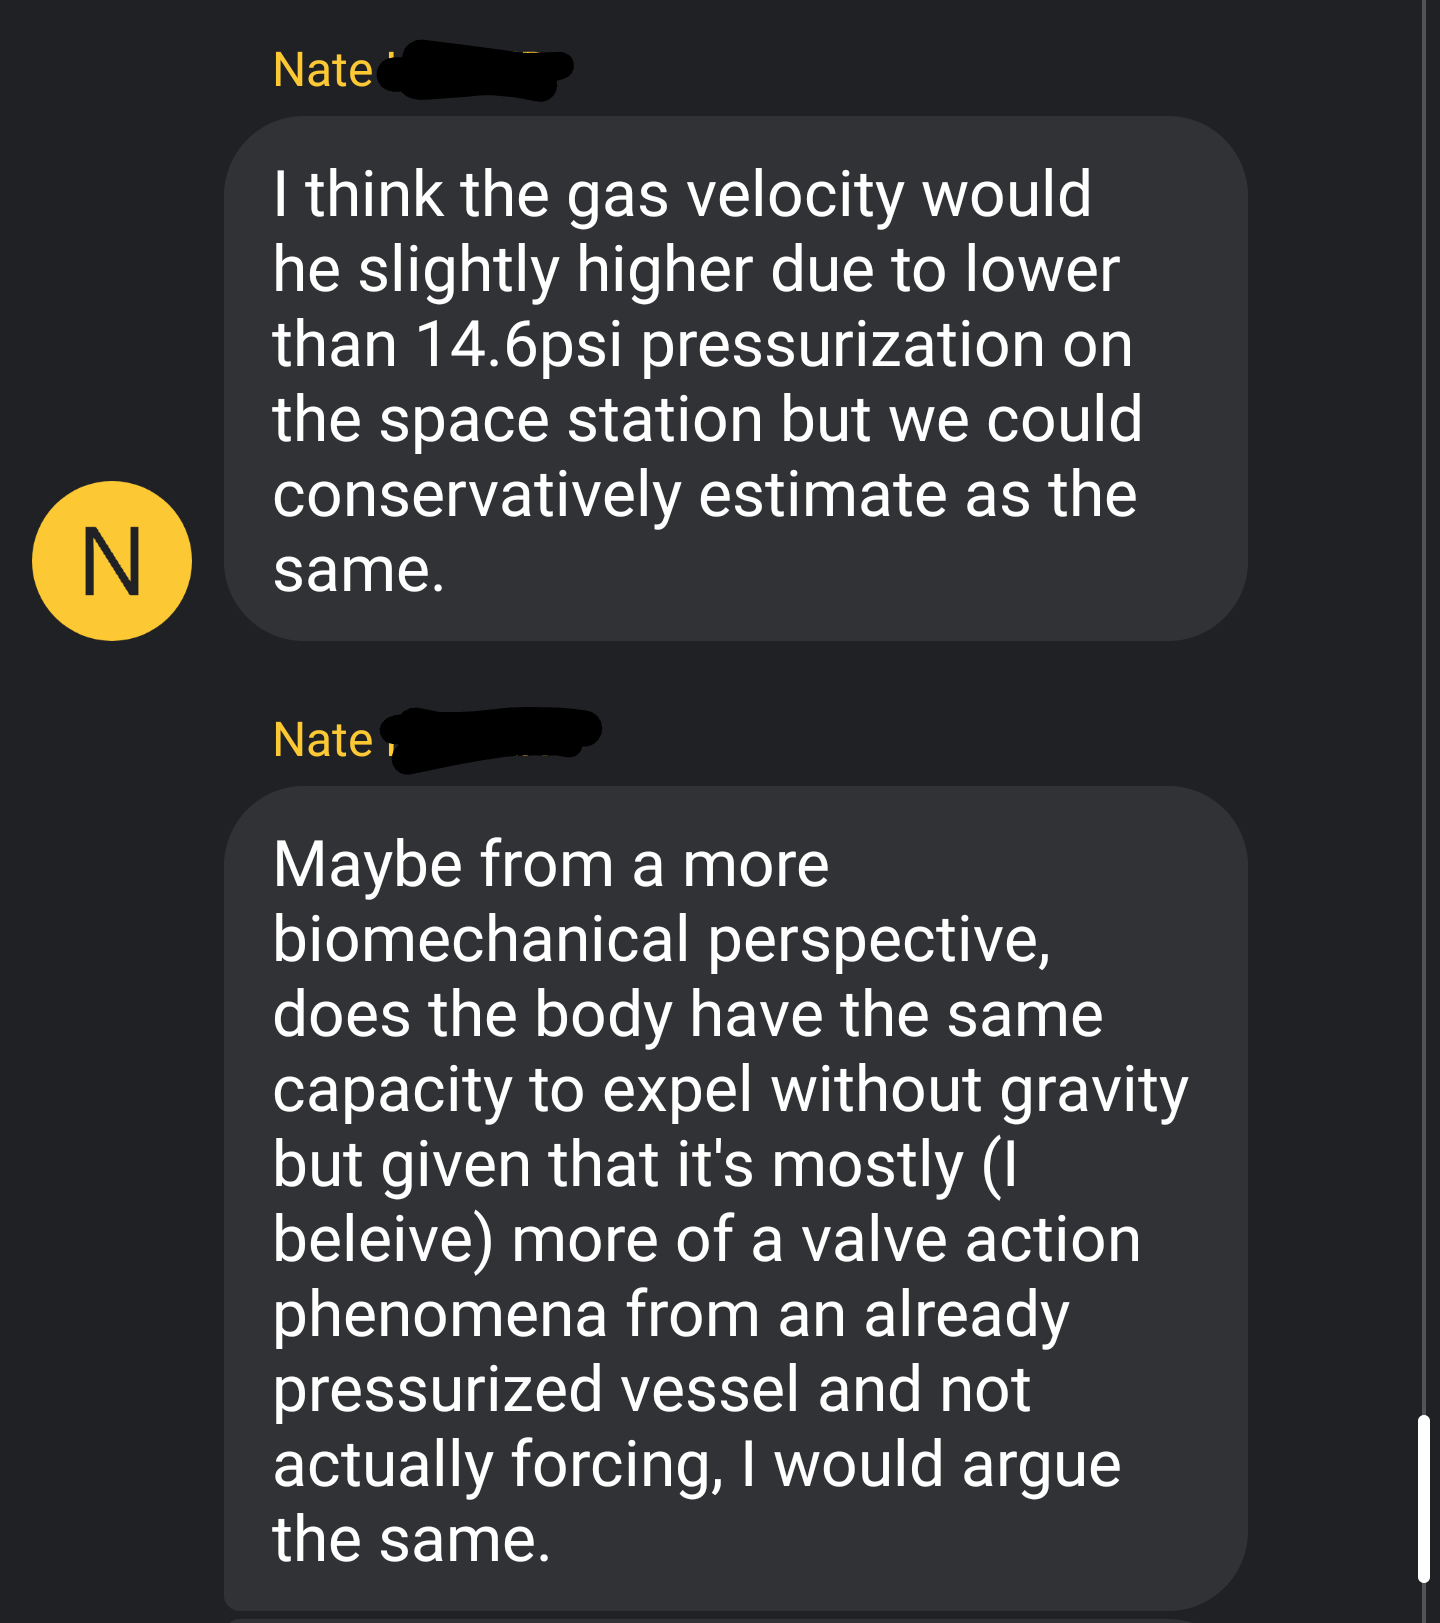 steve irwin death video - Nate I think the gas velocity would he slightly higher due to lower than 14.6psi pressurization on the space station but we could conservatively estimate as the same. Nate. Maybe from a more biomechanical perspective, does the bo